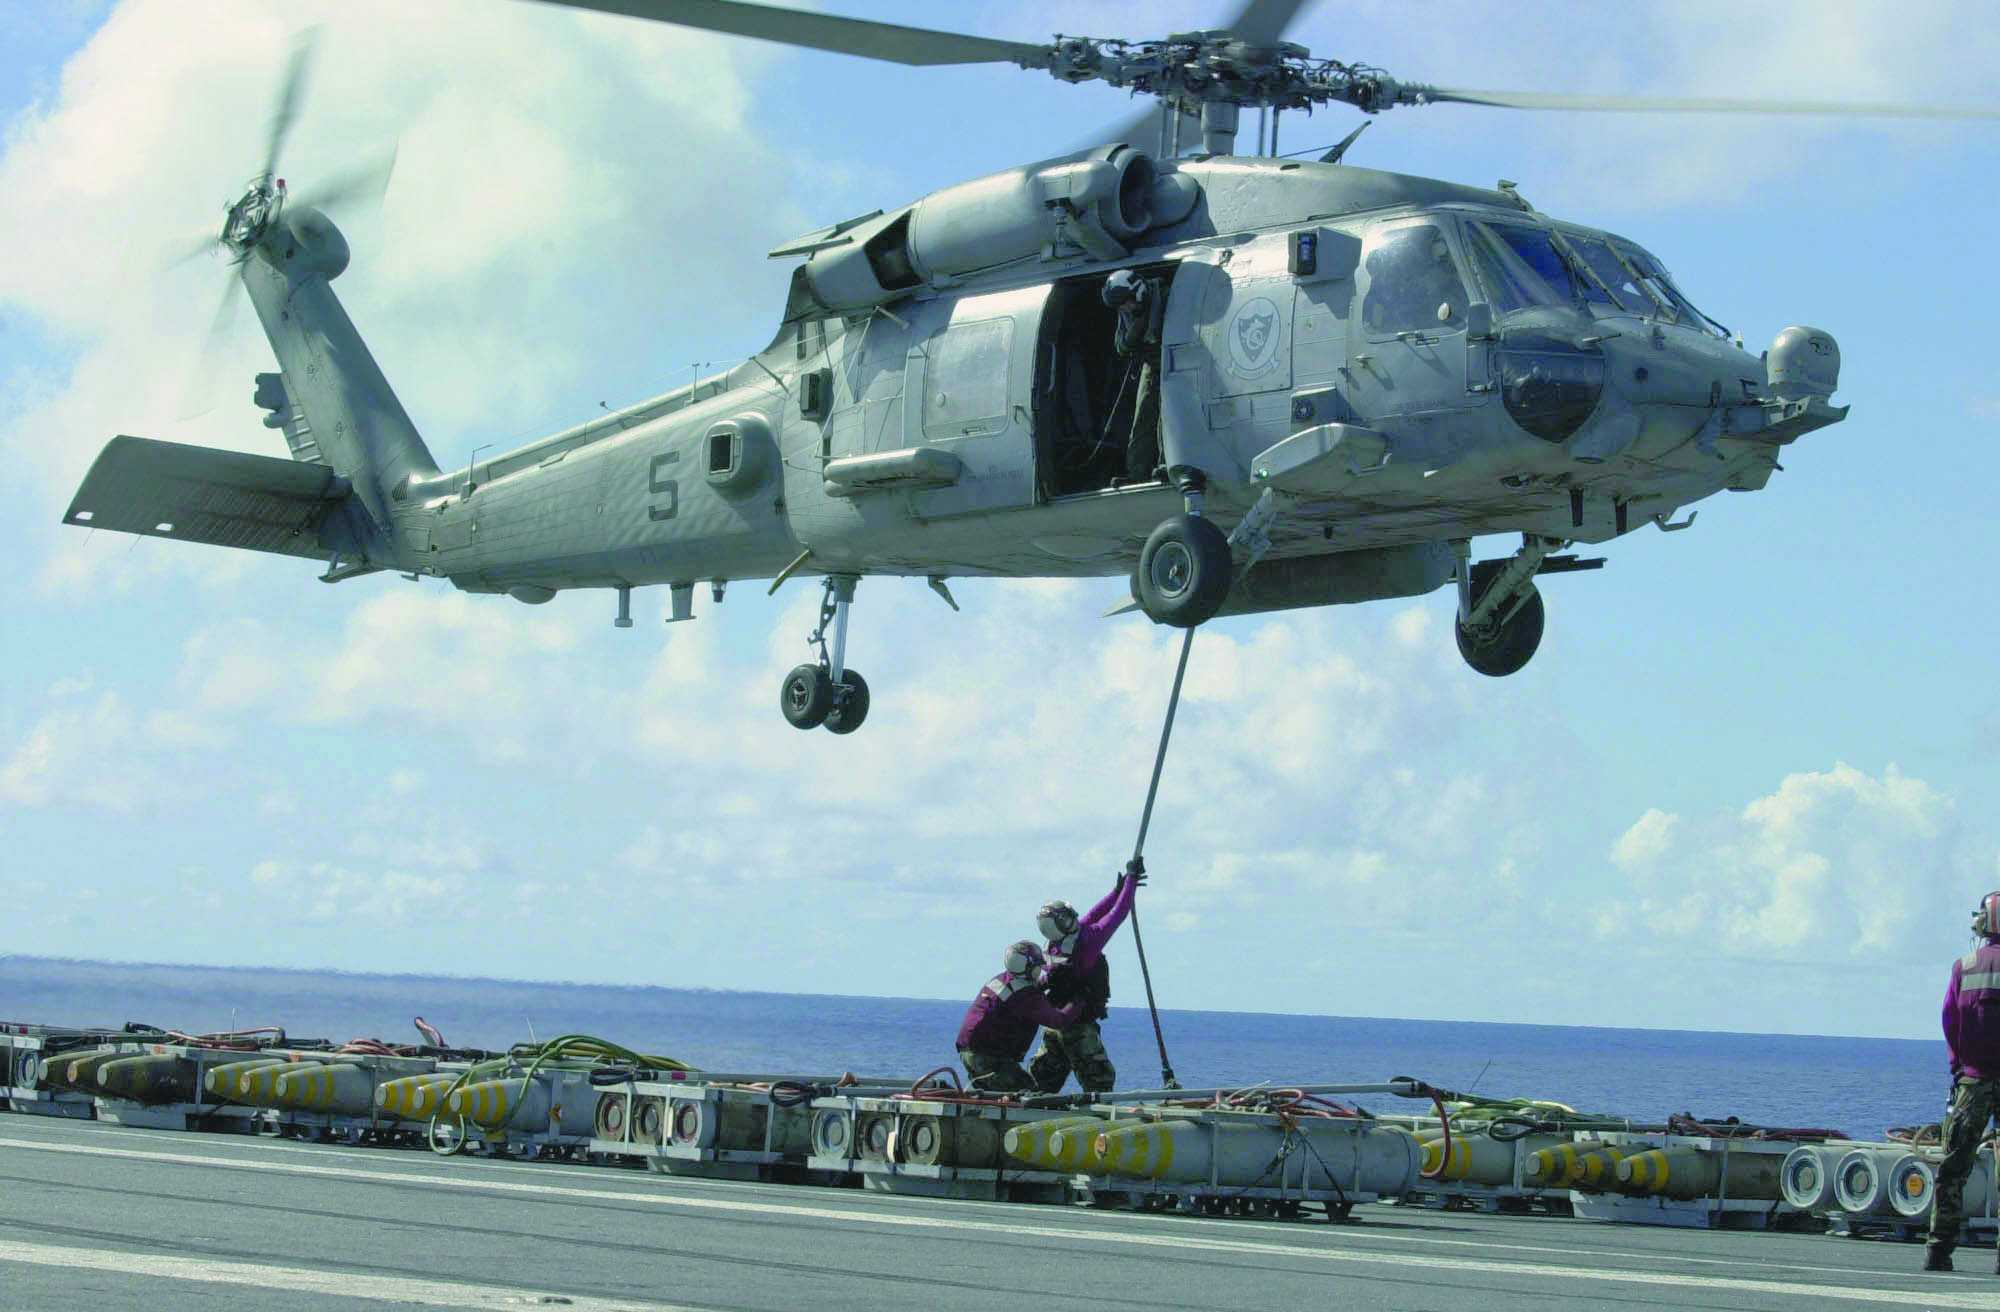 An SH-60 Seahawk performing VERTREP (Vertical Replenishment). Hundreds of transfers, one at a time.